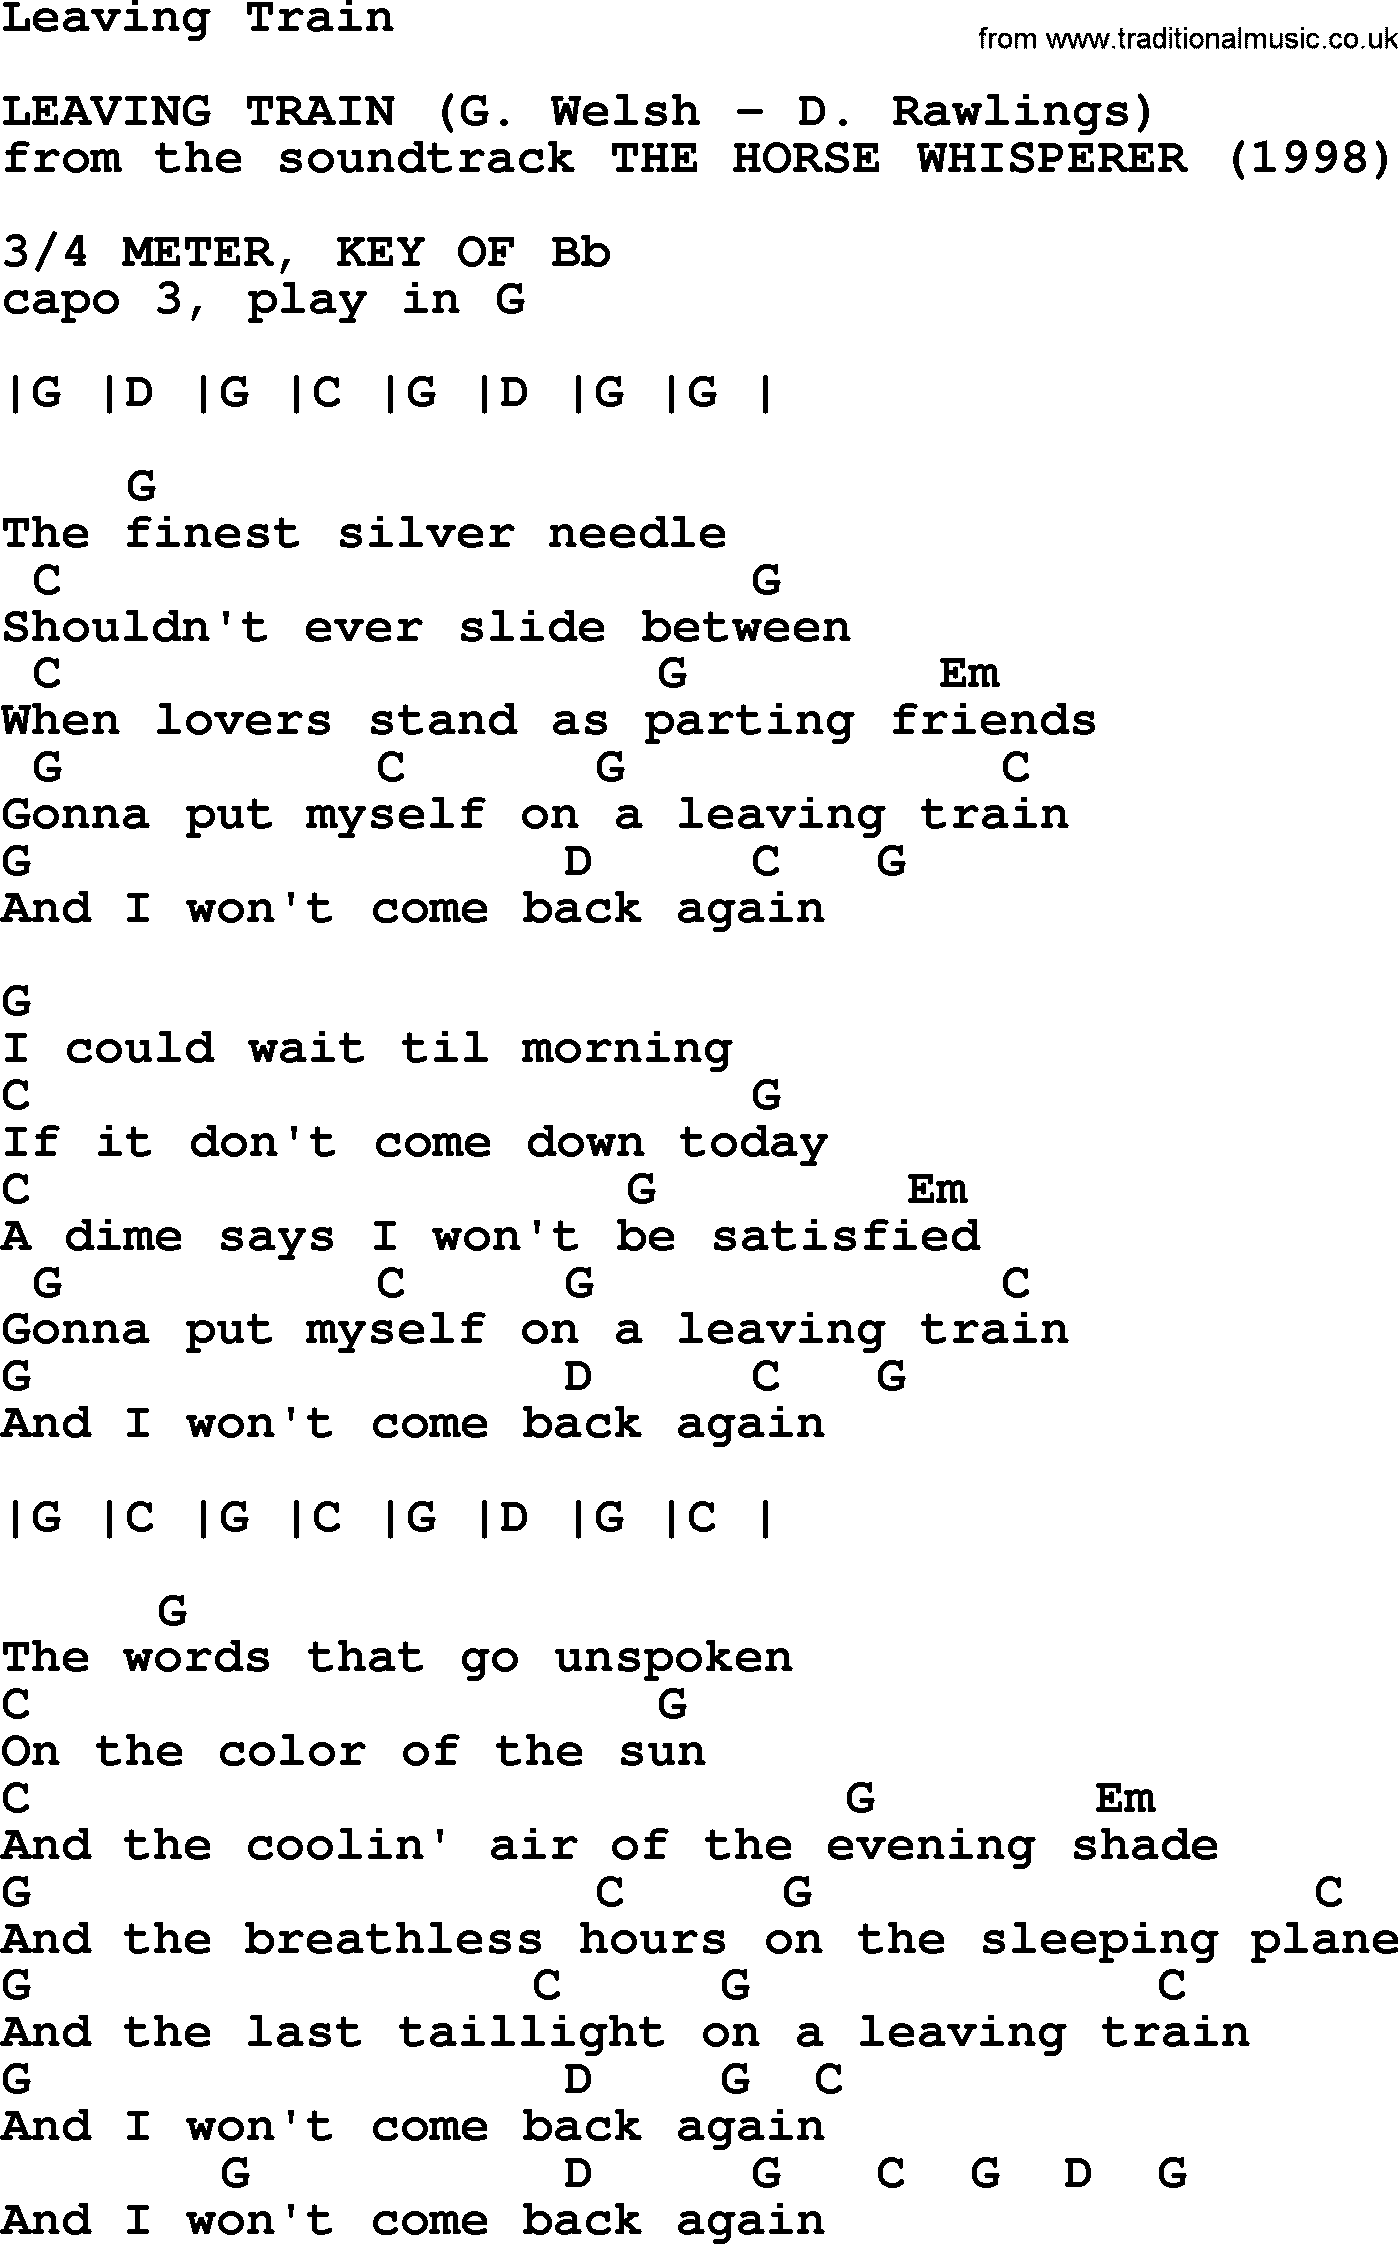 Bluegrass song: Leaving Train, lyrics and chords